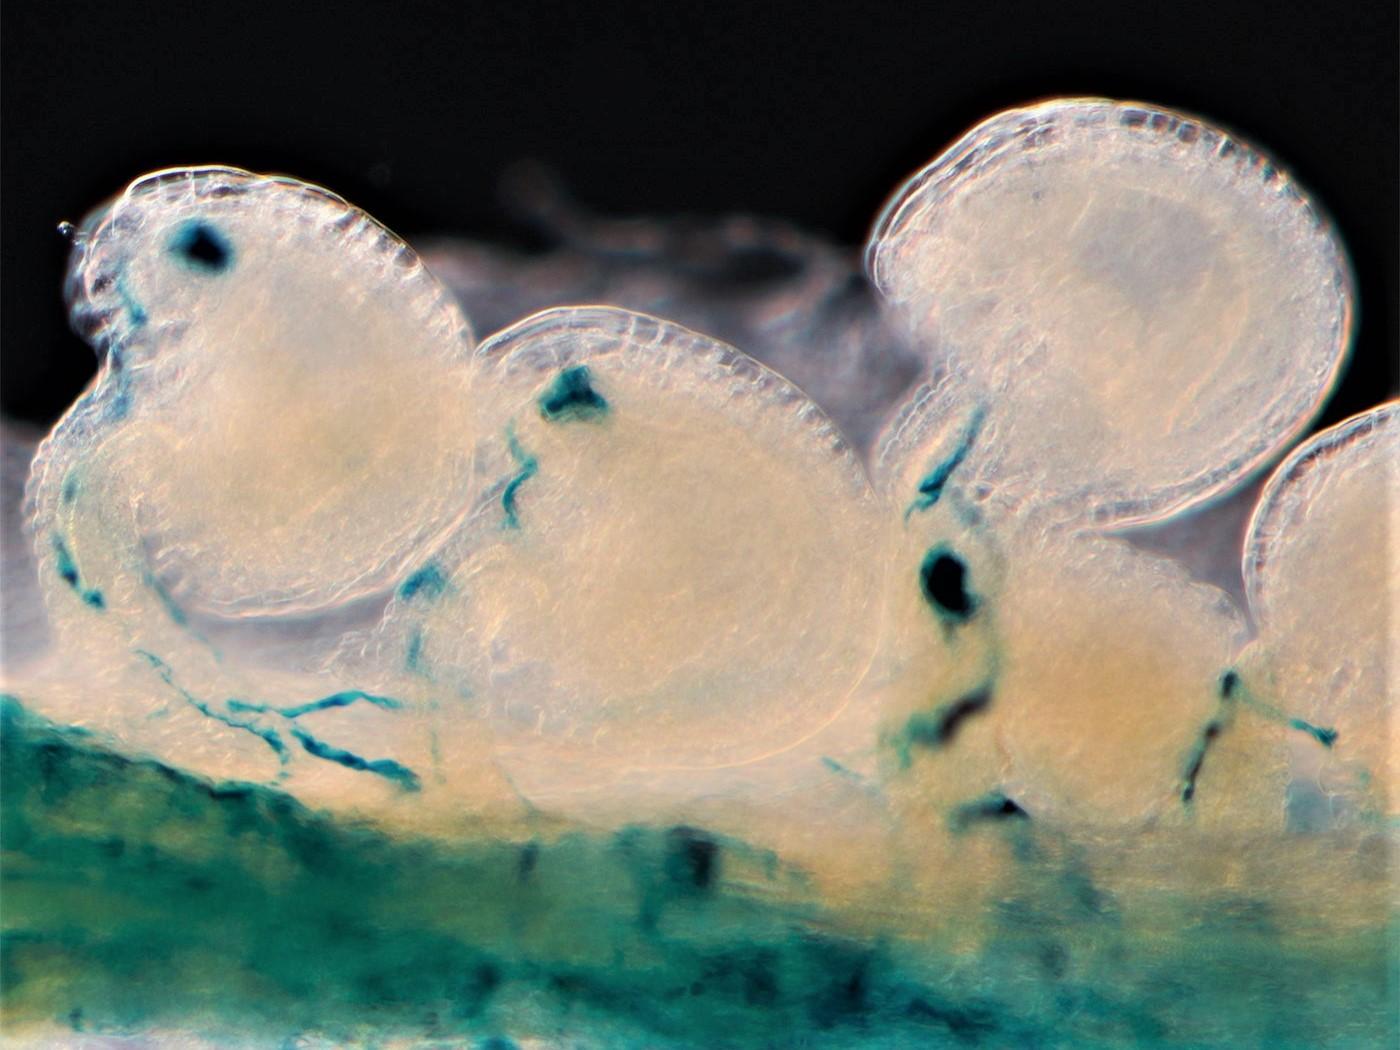 Close-up image of pollen tubes